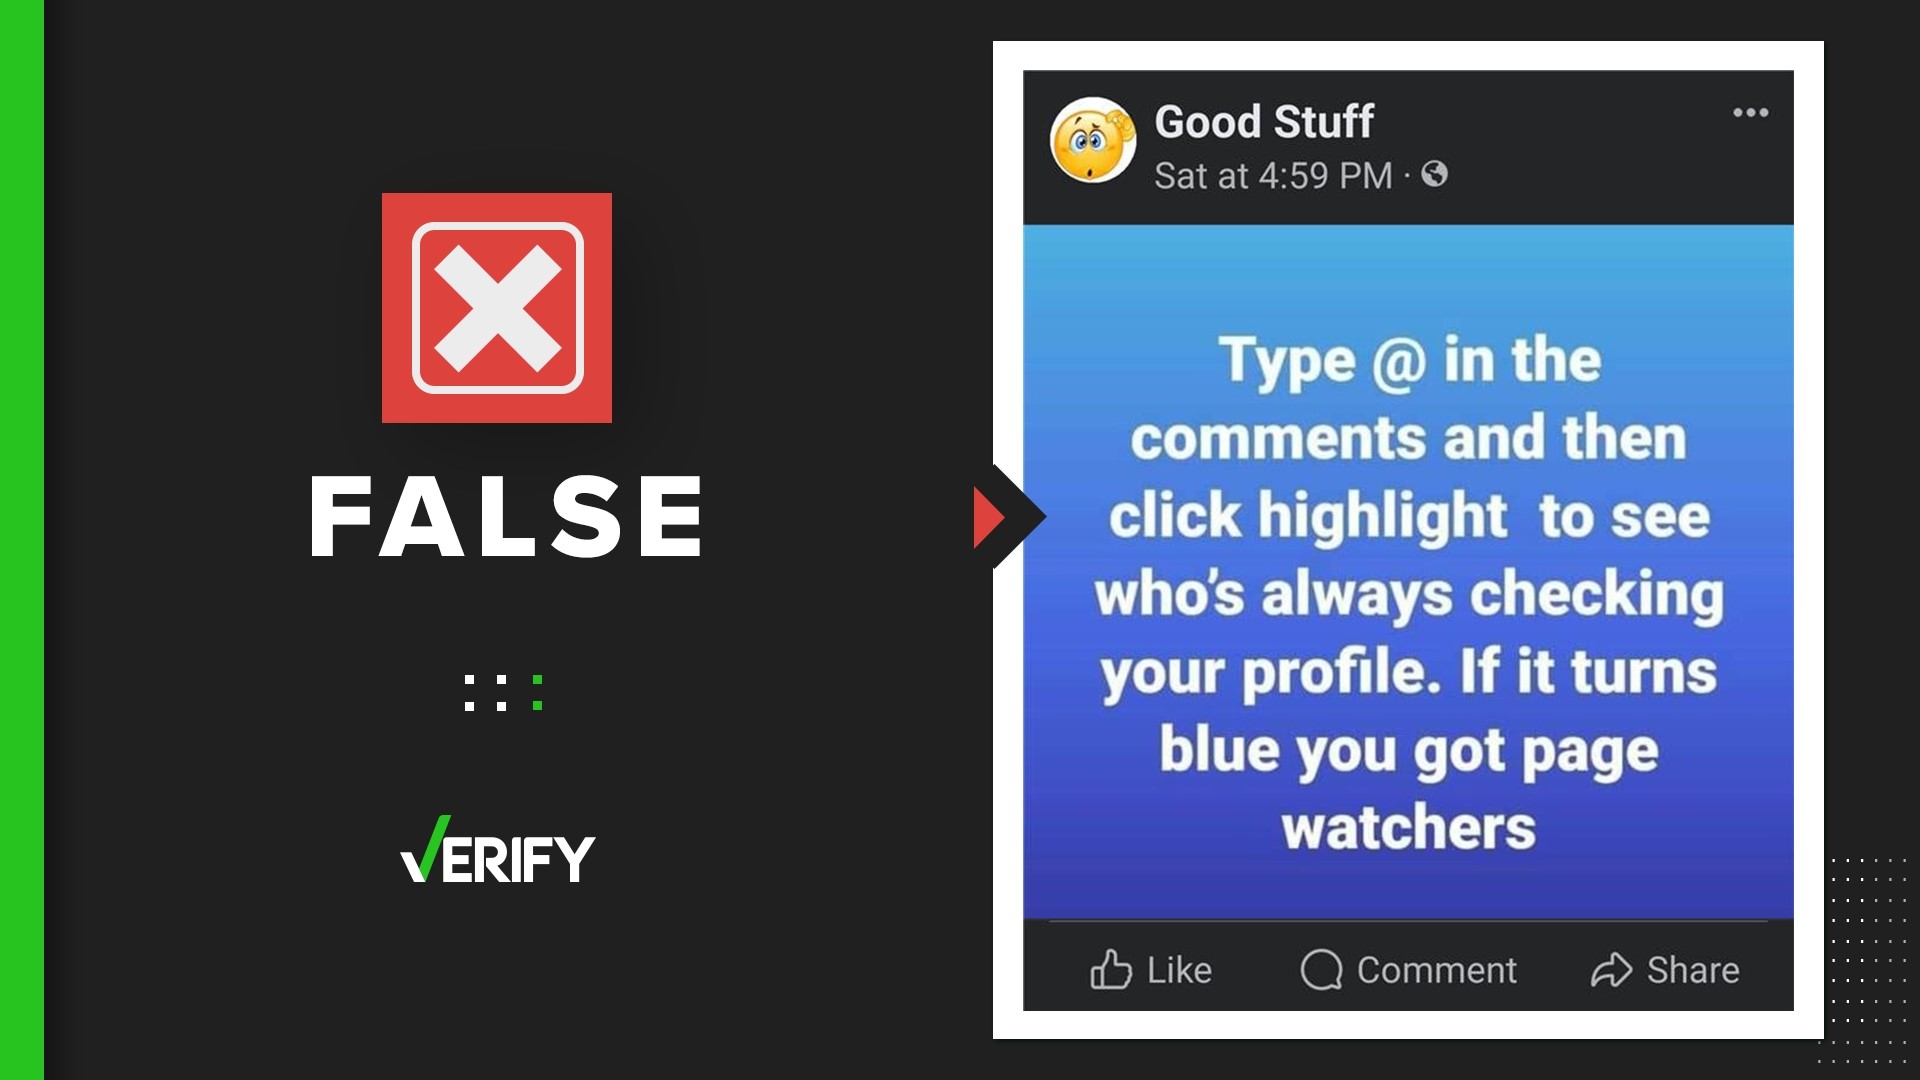 The @highlight tag notifies your friends of a post you wanted to amplify, it doesn't show who's been watching your Facebook page.